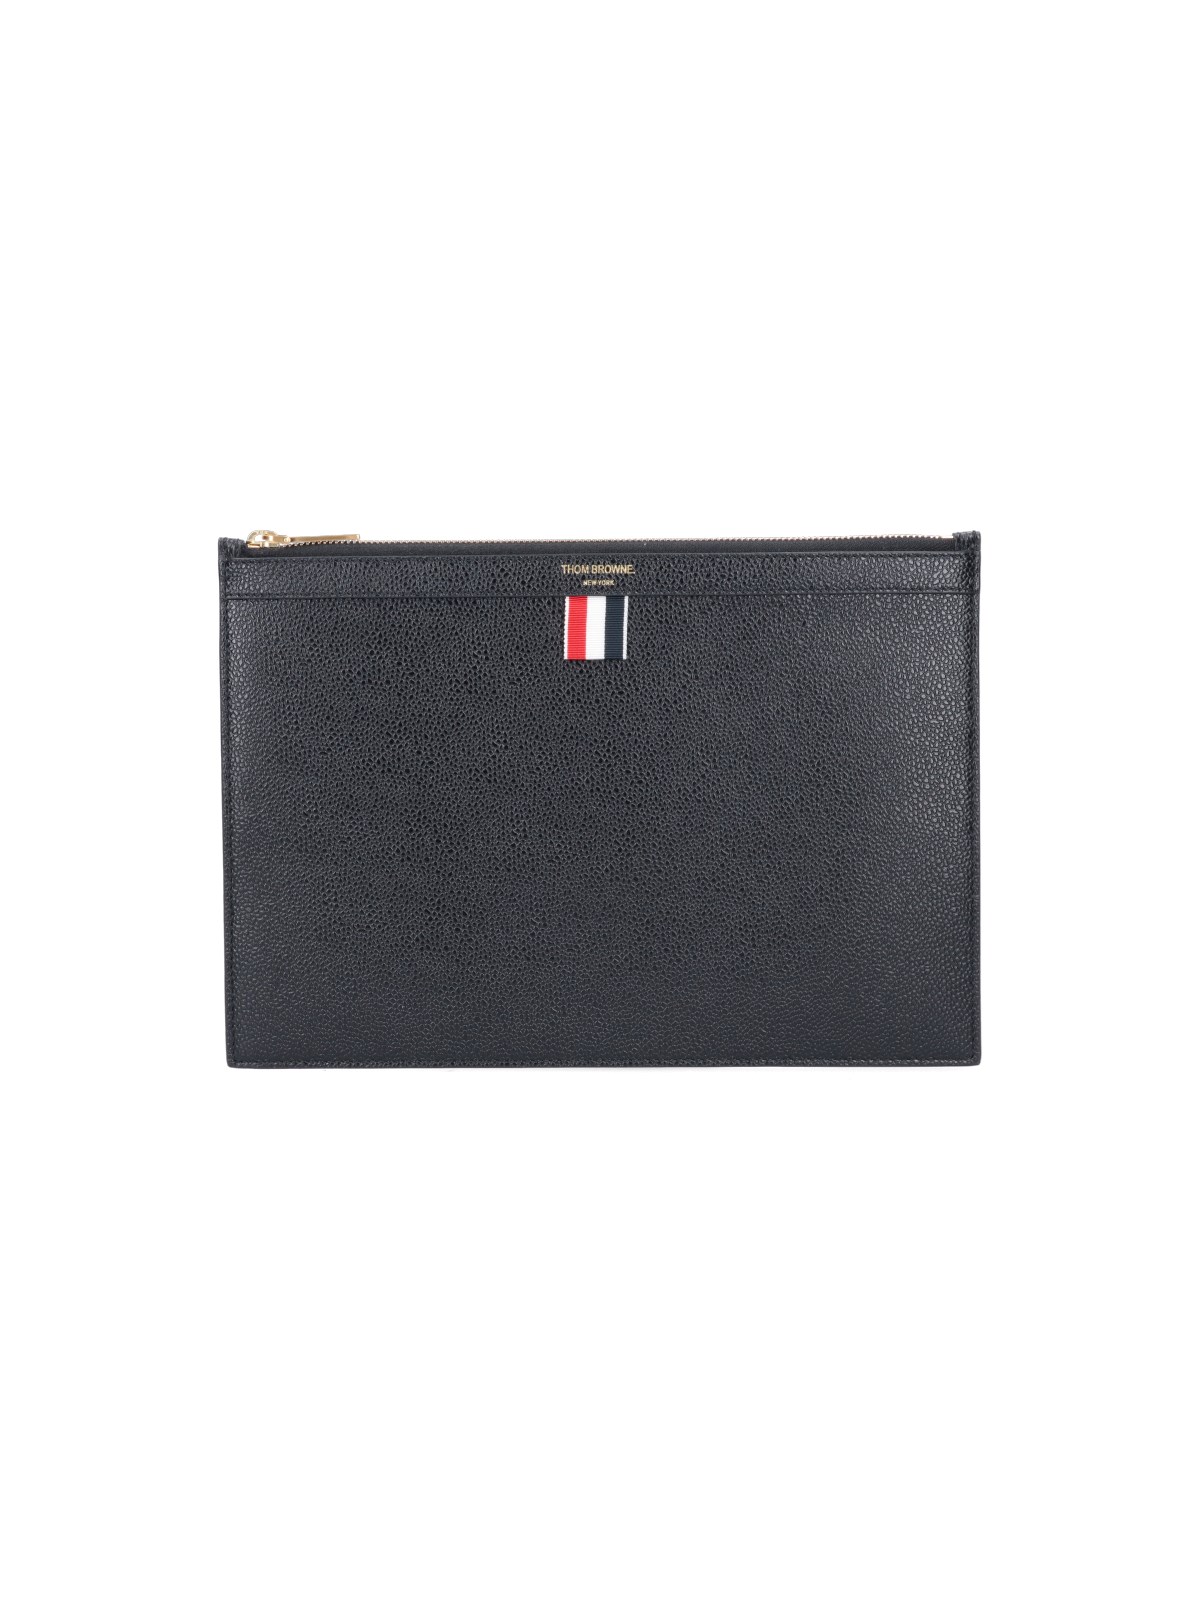 Thom Browne Tablet Pouch In Black  